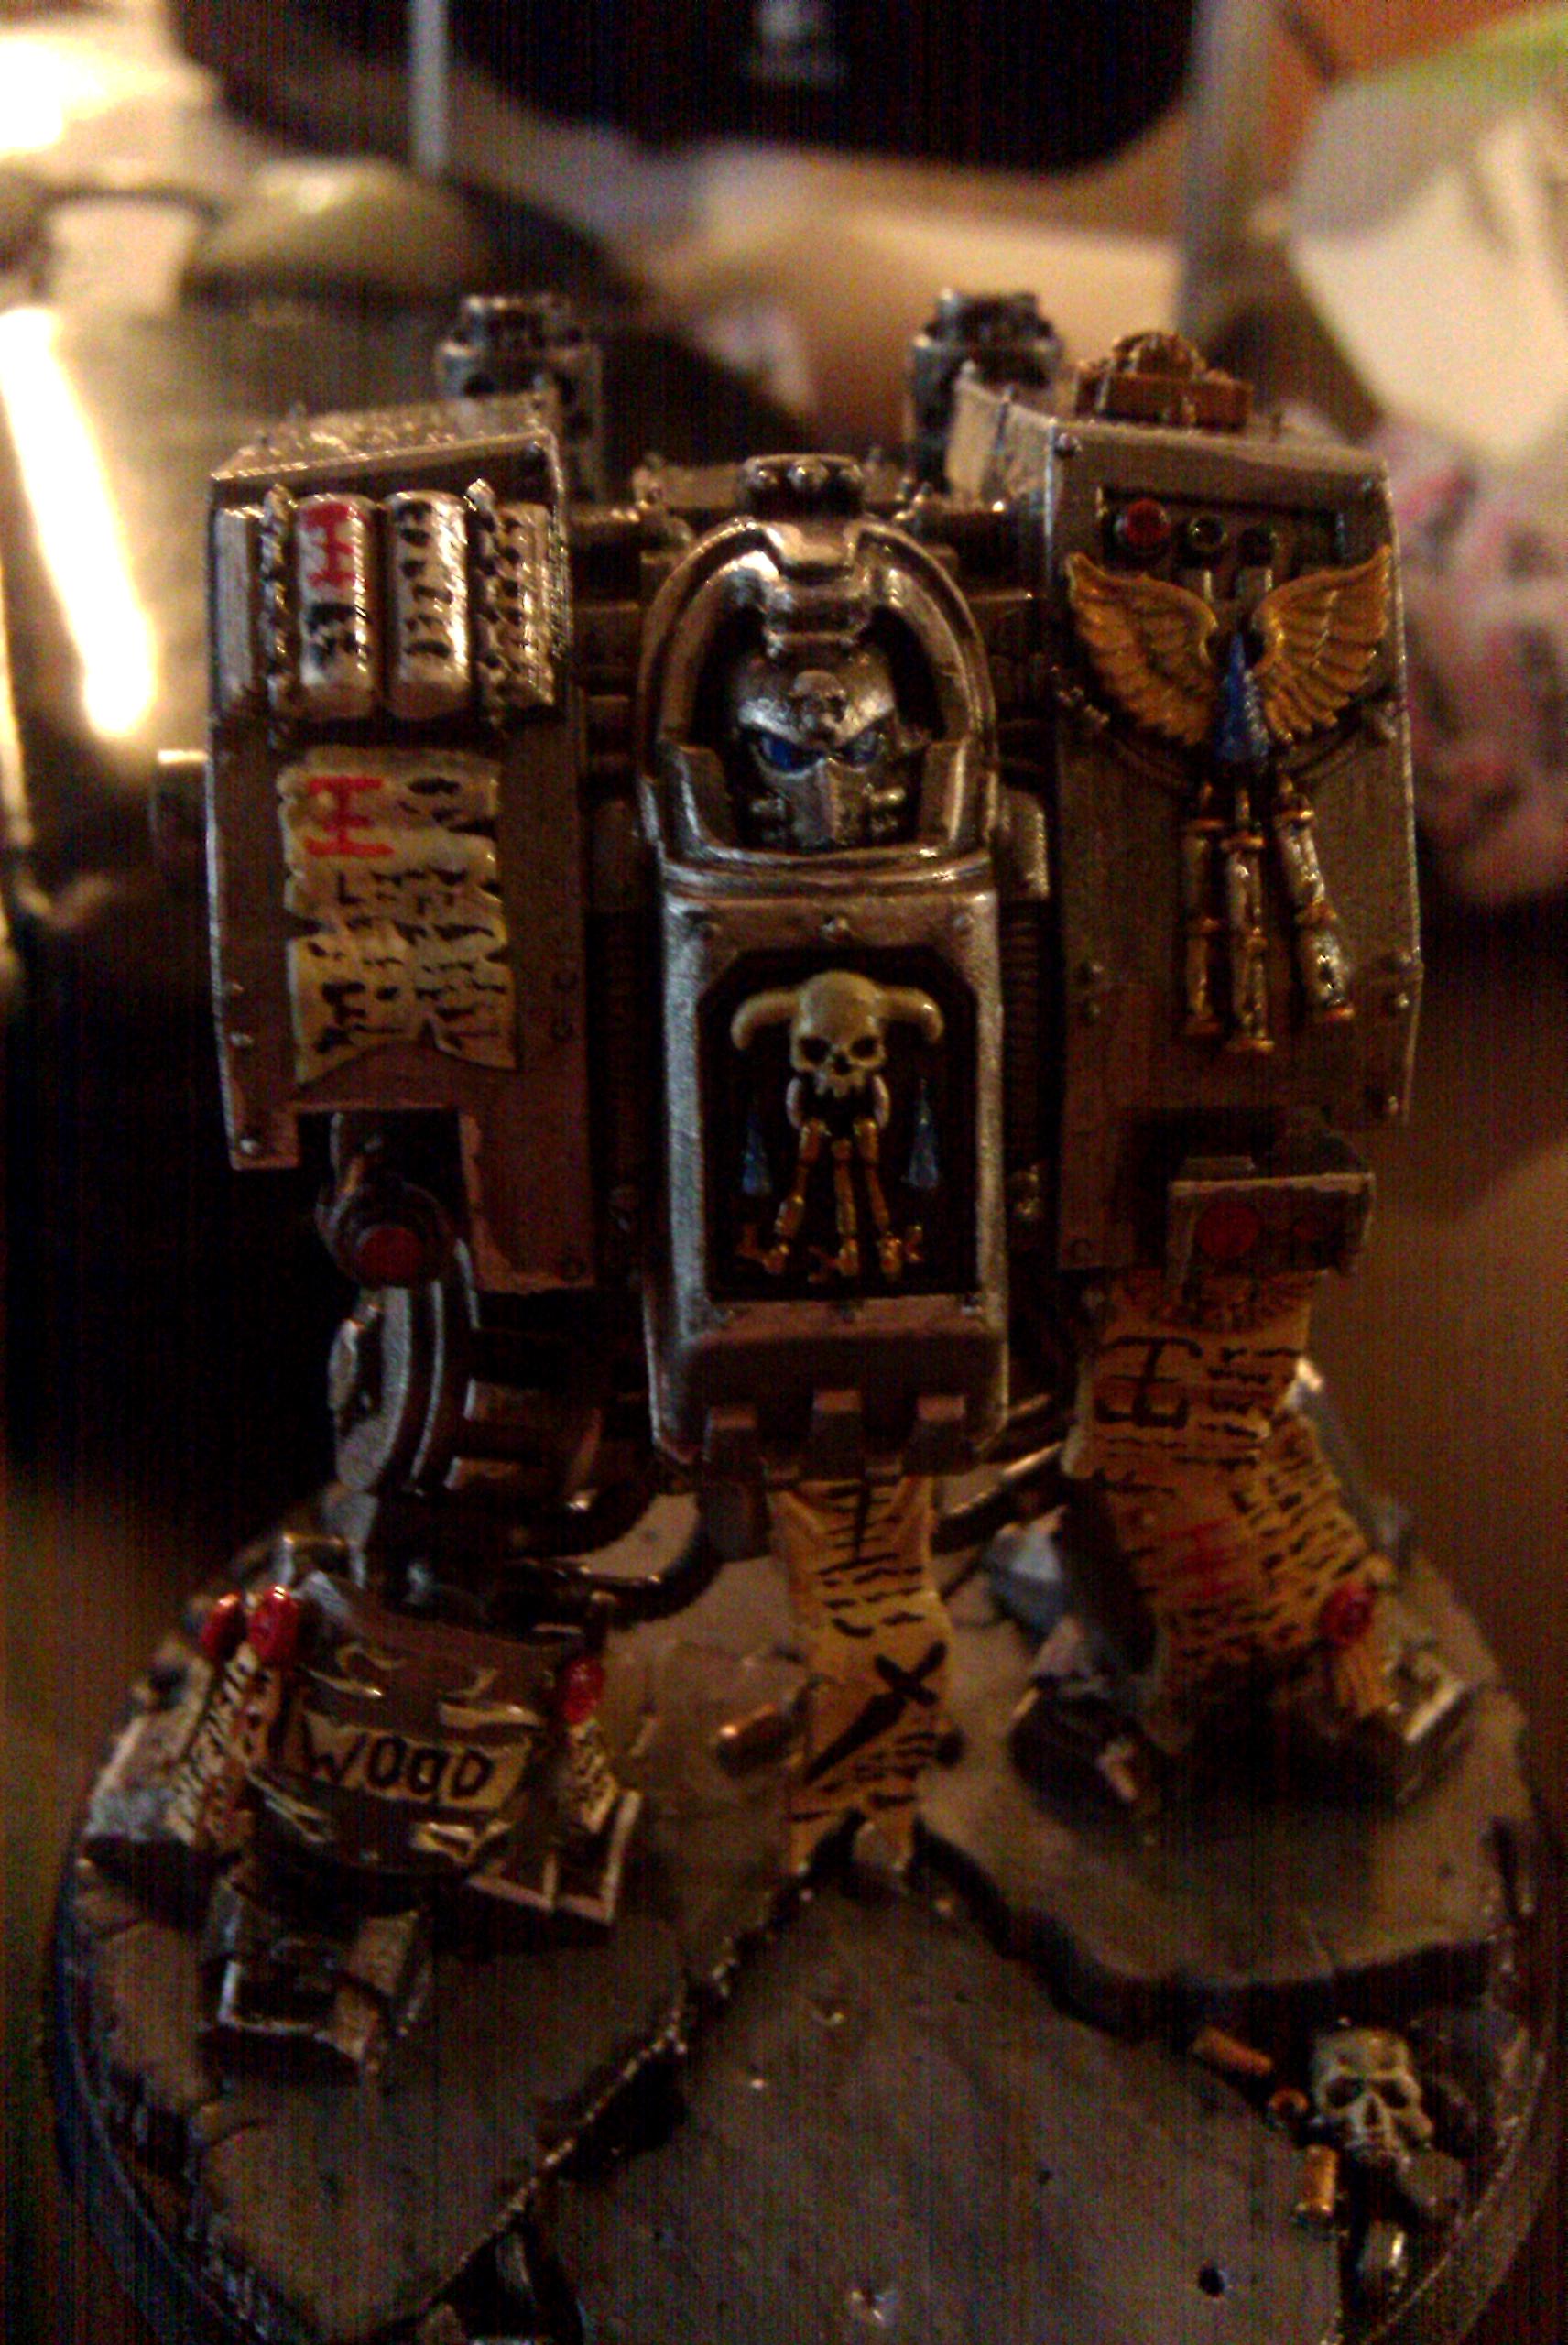 Grey Knights, Wood the Dreadnought